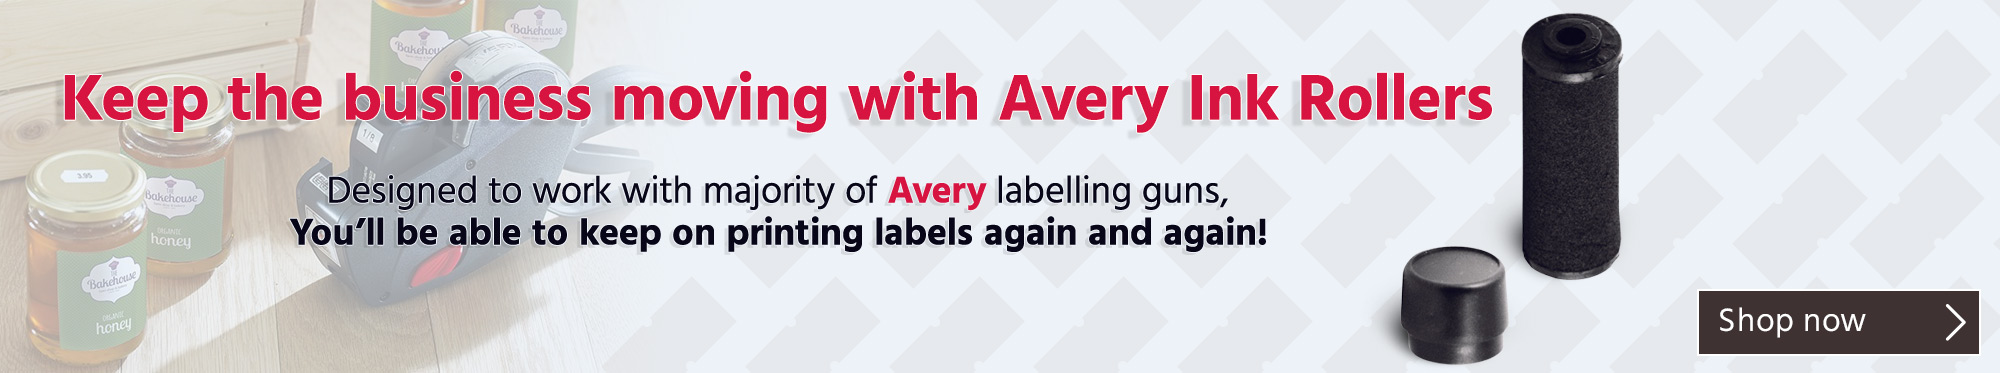 Keep Business Moving with Avery Ink Rollers